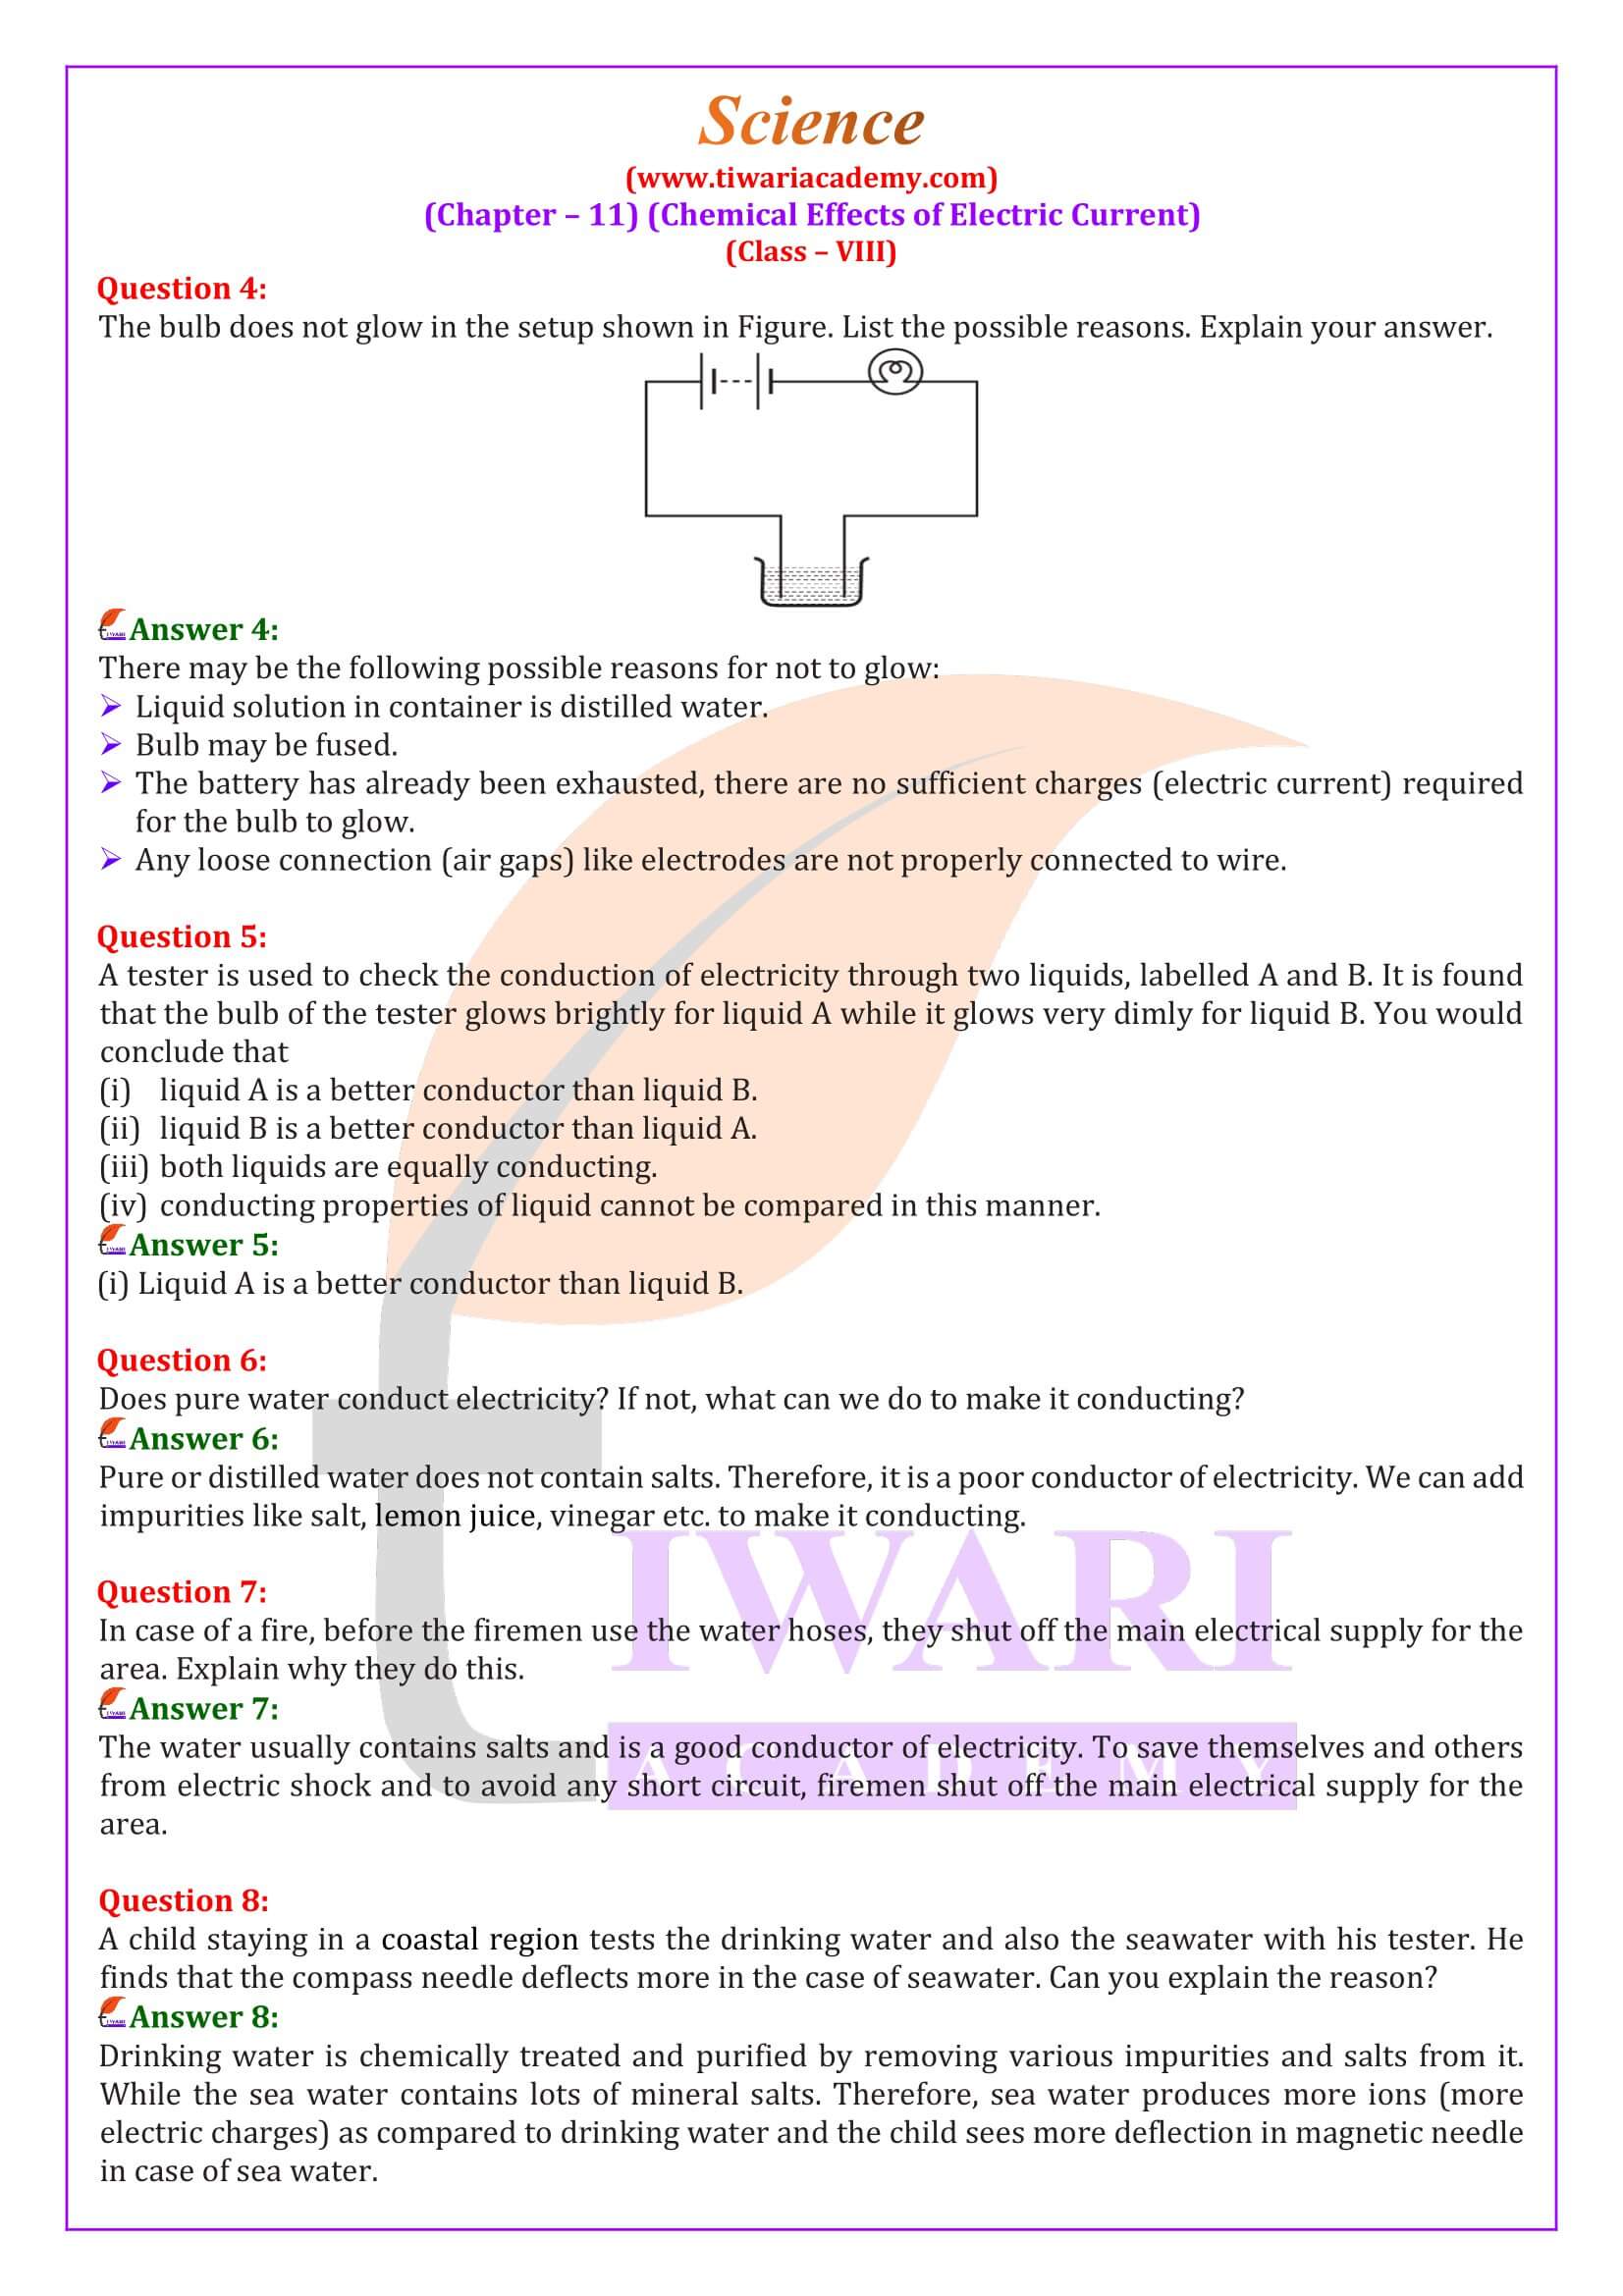 Class 8 Science Chapter 11